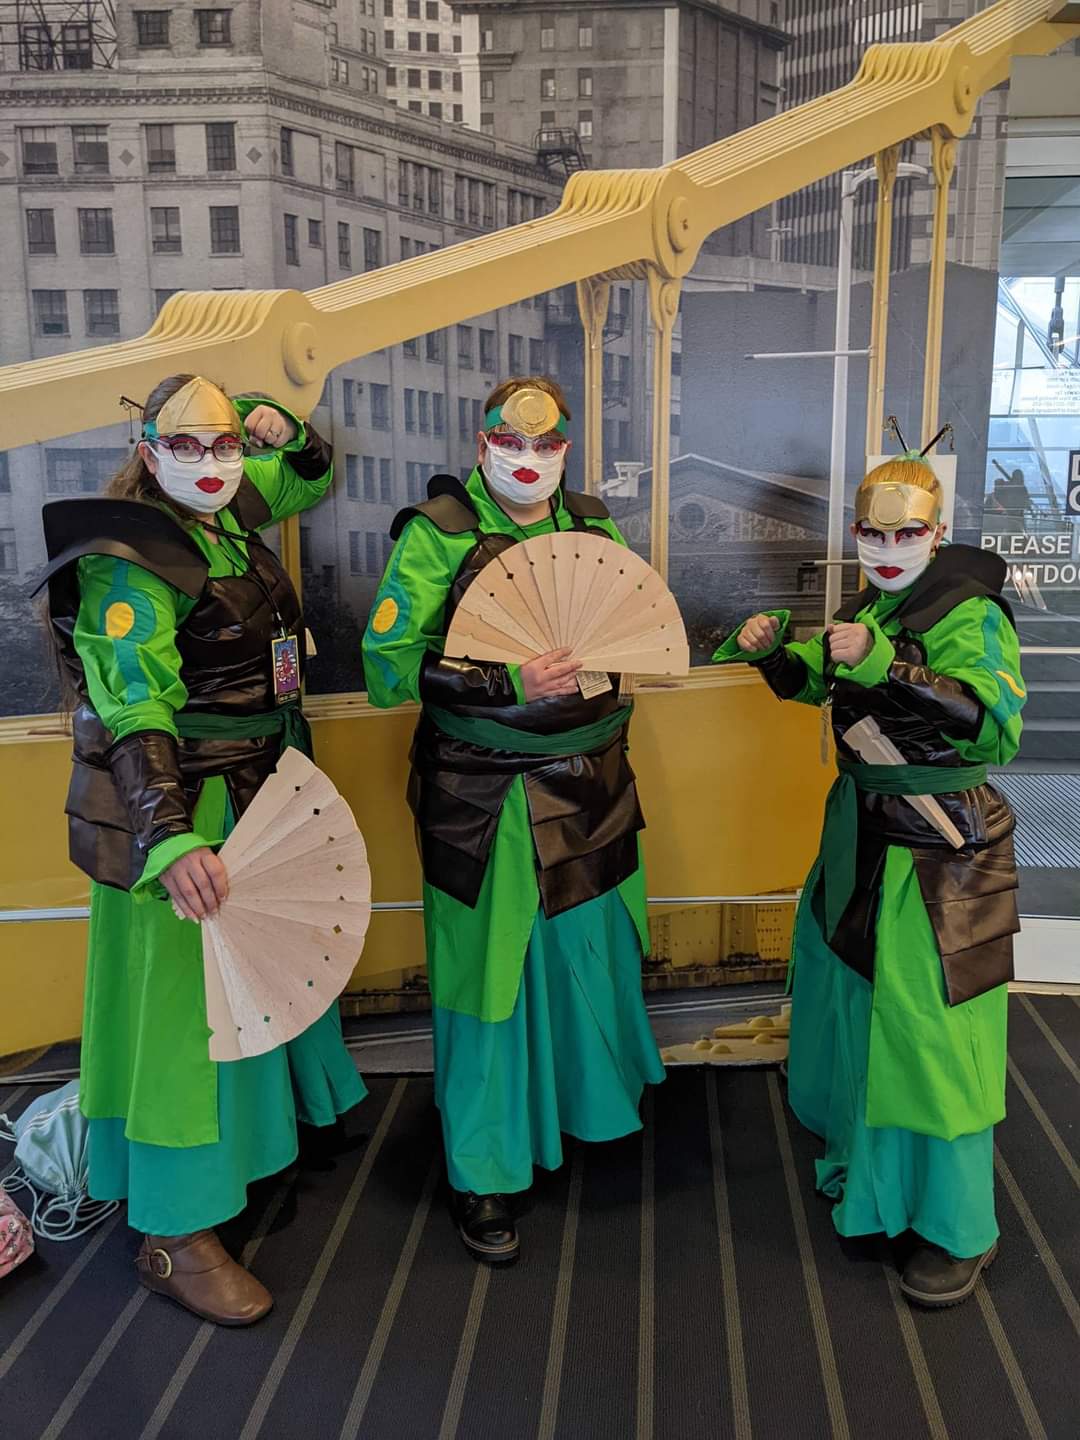 Three female cosplayers. They are dressed in dark green skirt with diagonal pleats, light green long jackets with long poofy sleeves, and leather (plether) armor and wrist guards. They have white face paint with red eye makeup. Due to covid had to wear white masks with red lips to stay safe but keep the look. They are holding large wooden fans.